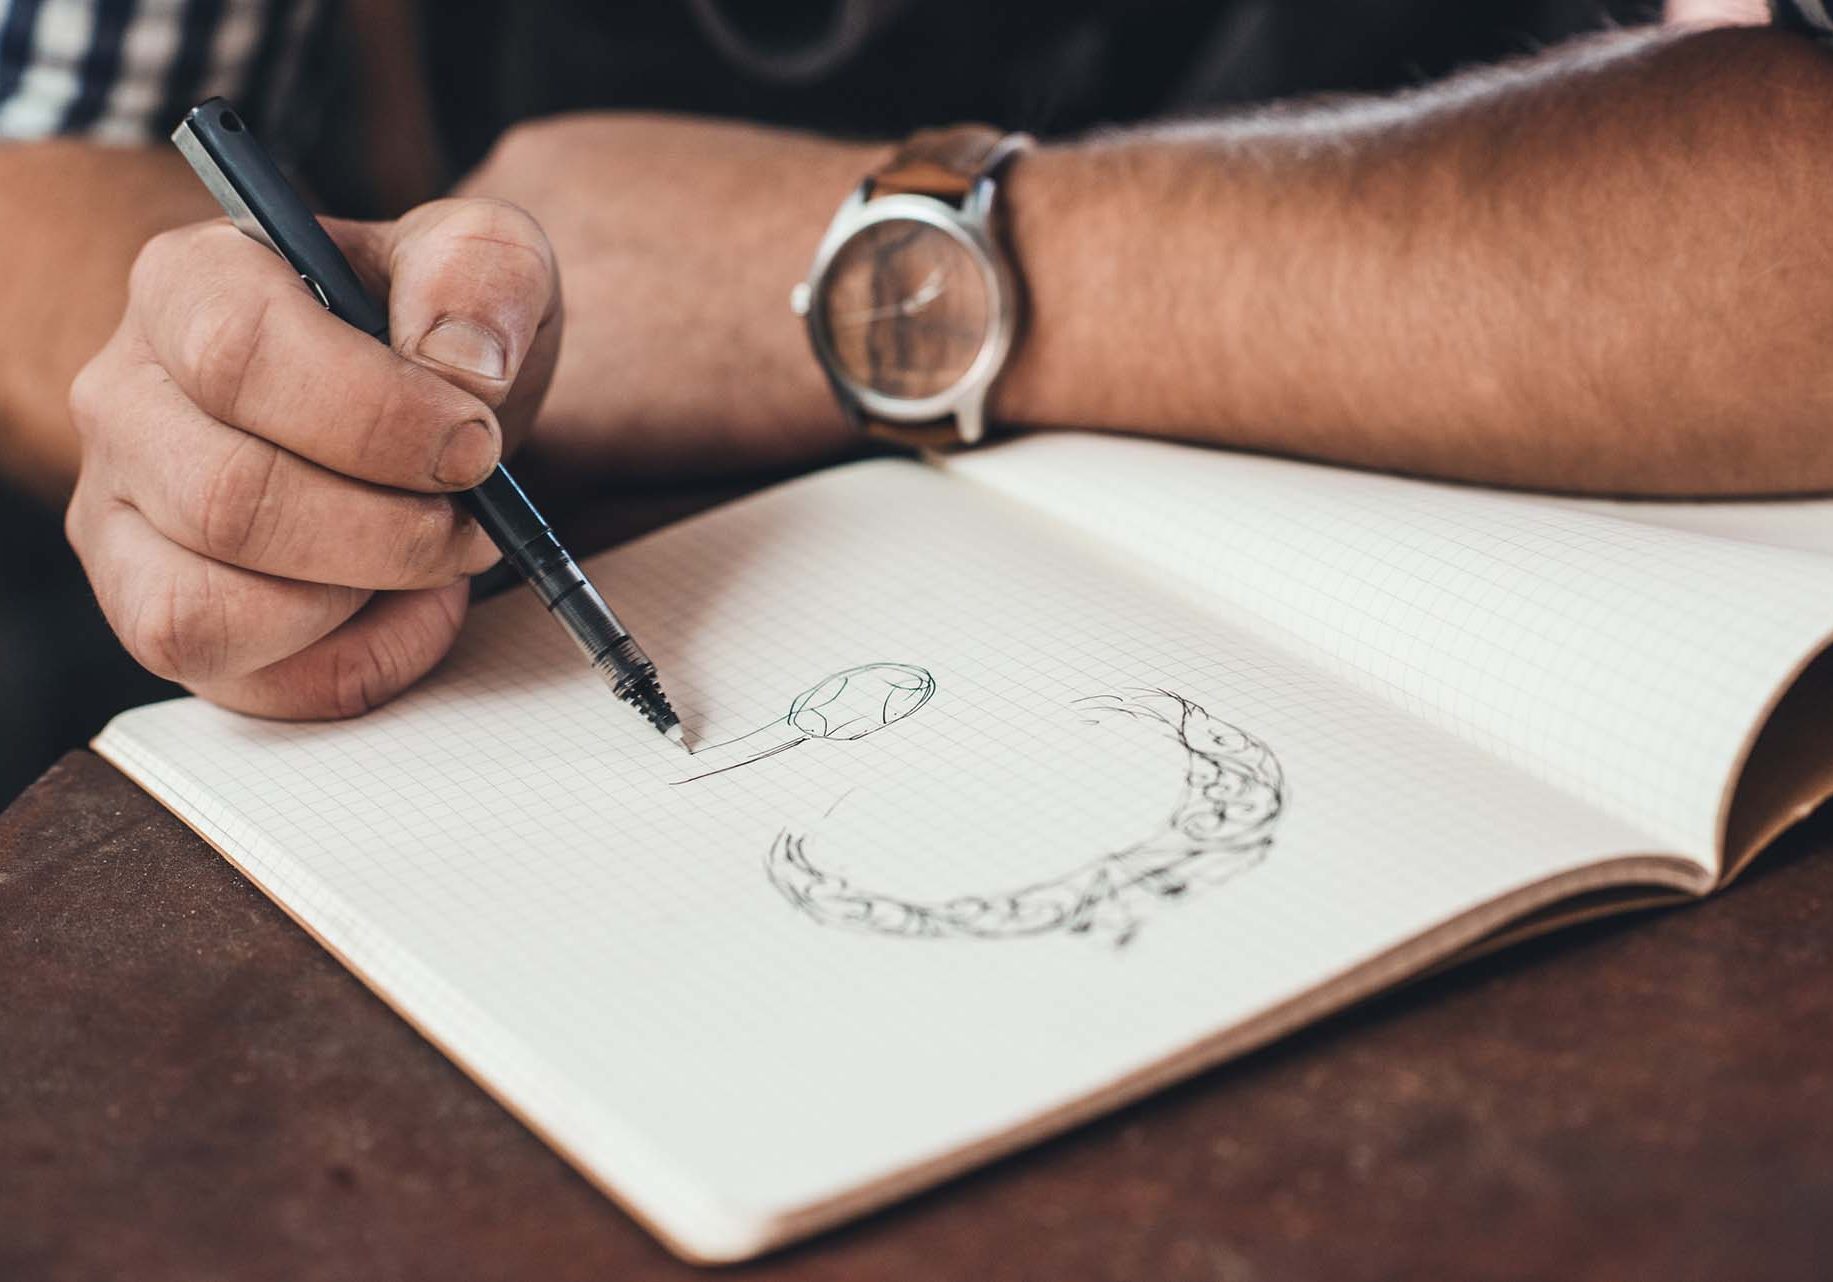 Closeup of a jeweler leaning on a bench sketching out new jewelry designs in a notebook while working in his shop